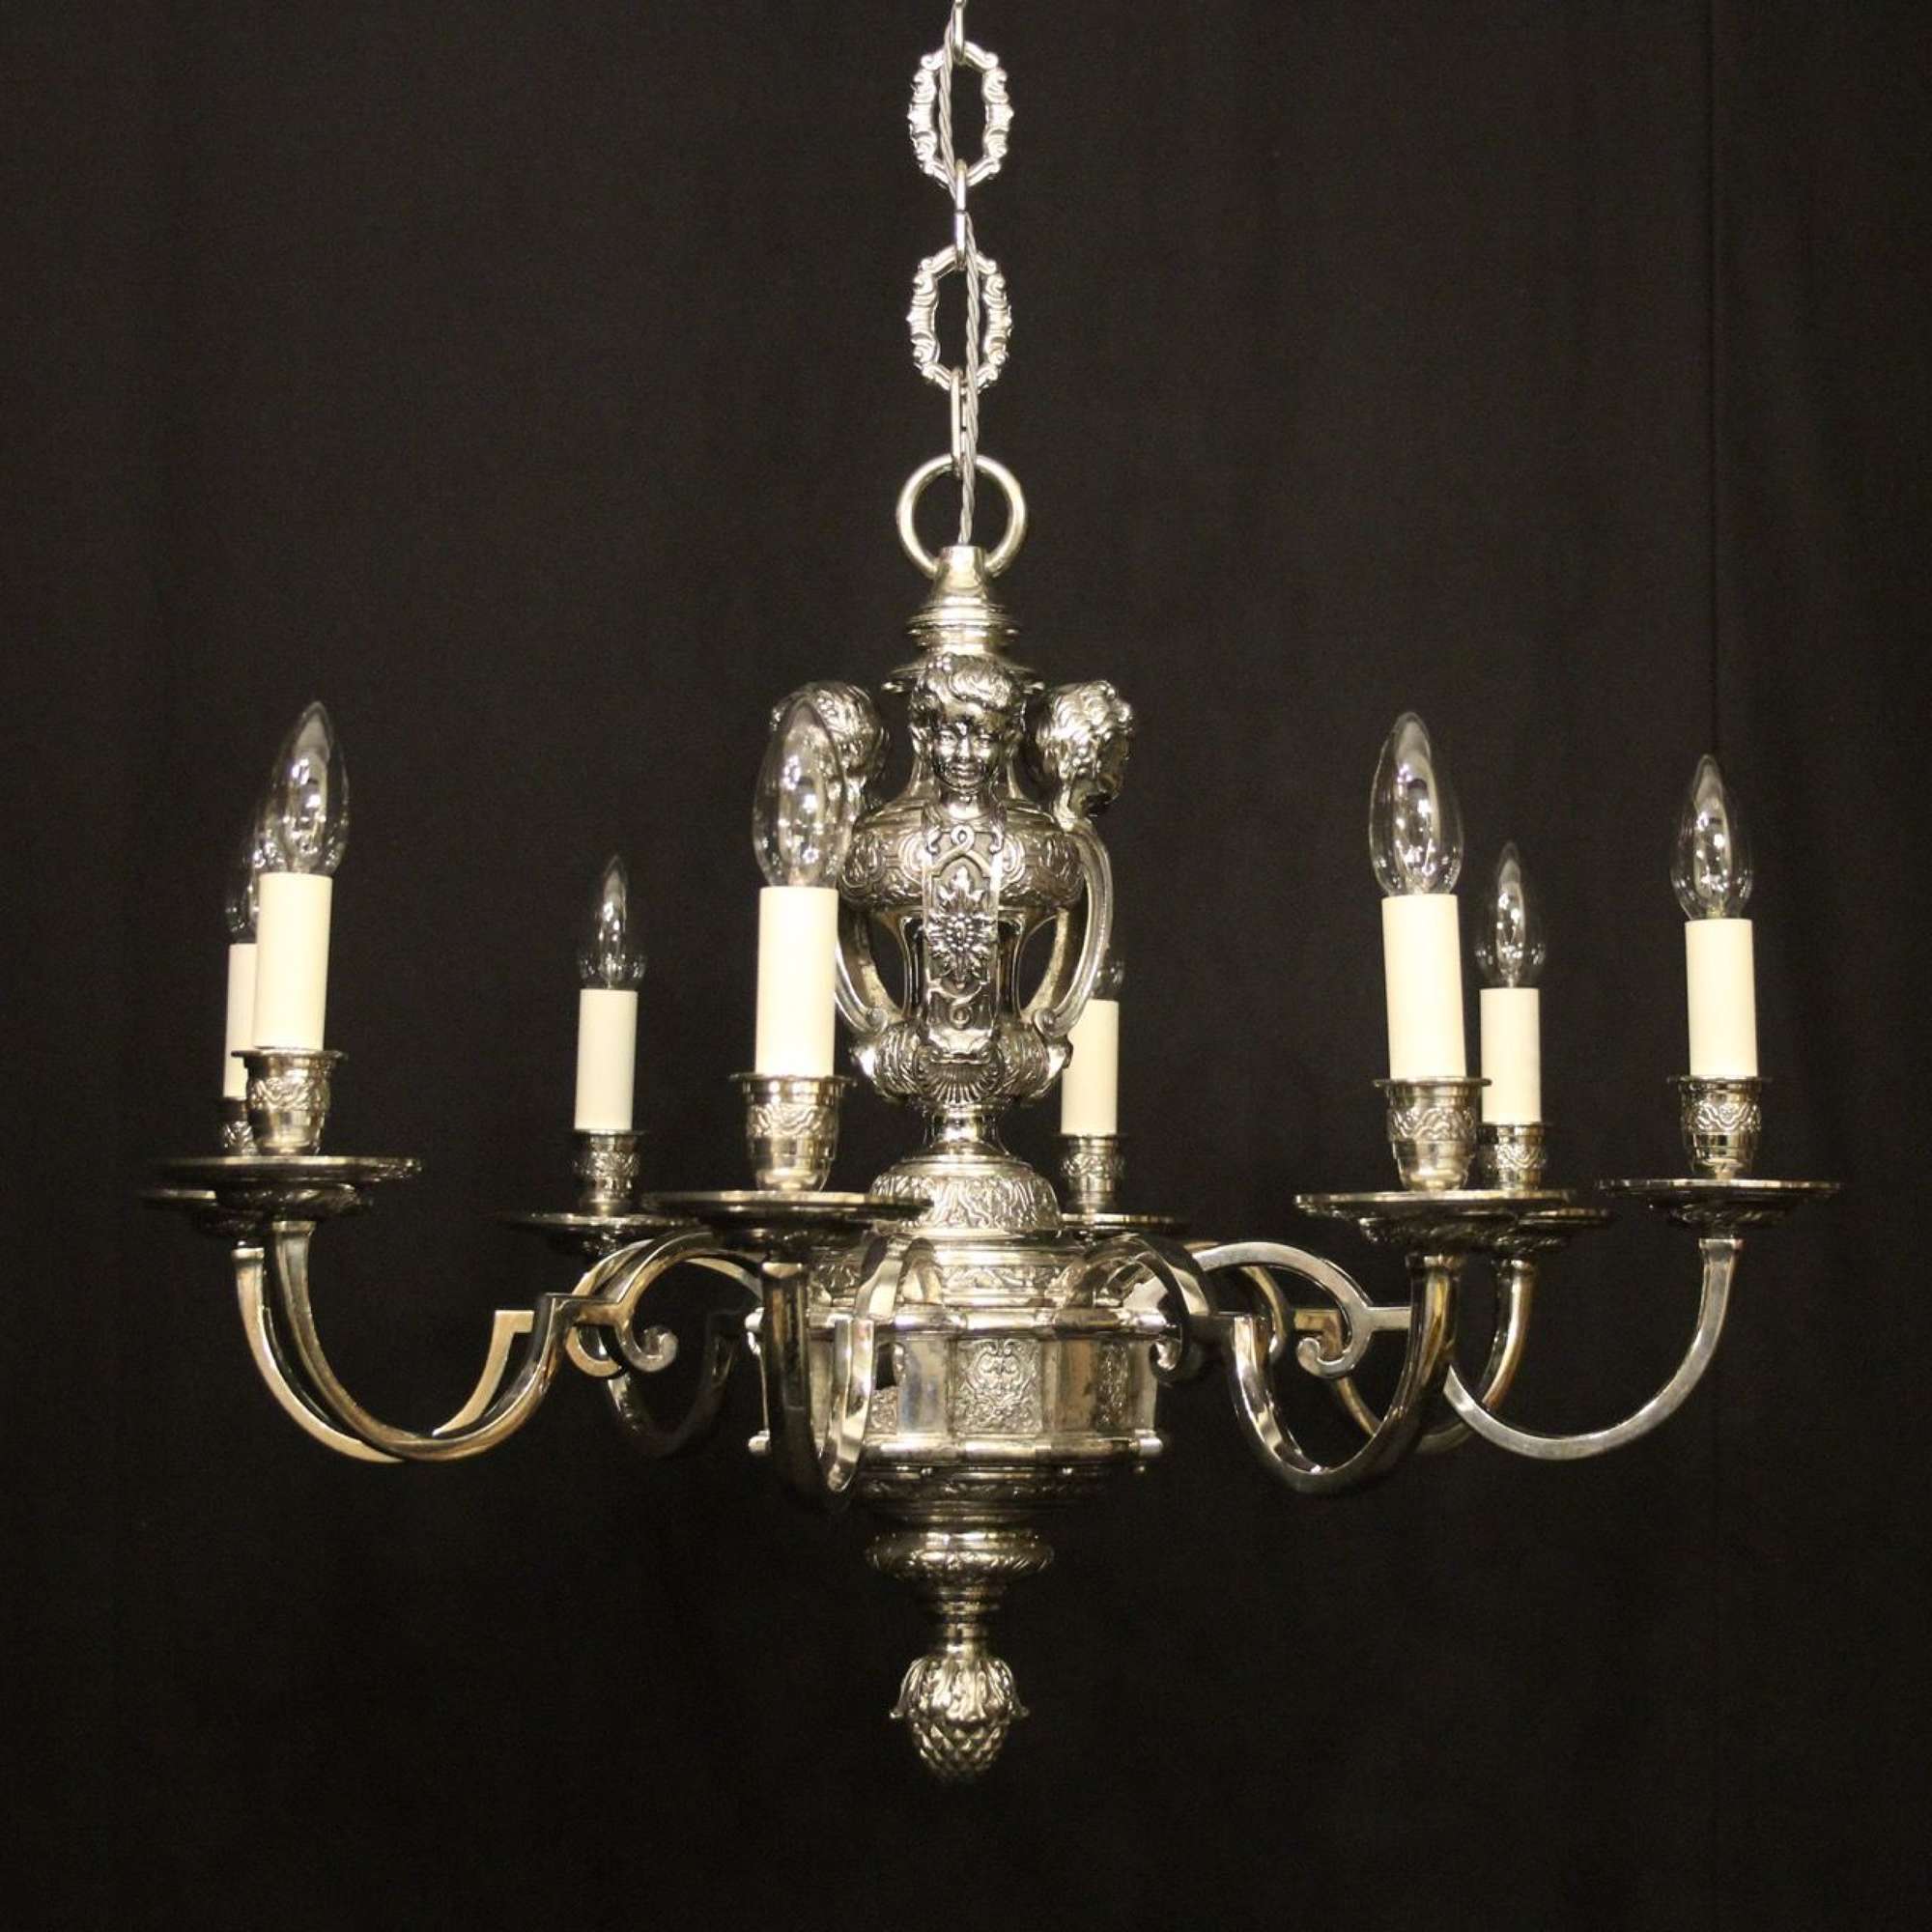 English Silver Plated 8 Light Antique Chandelier